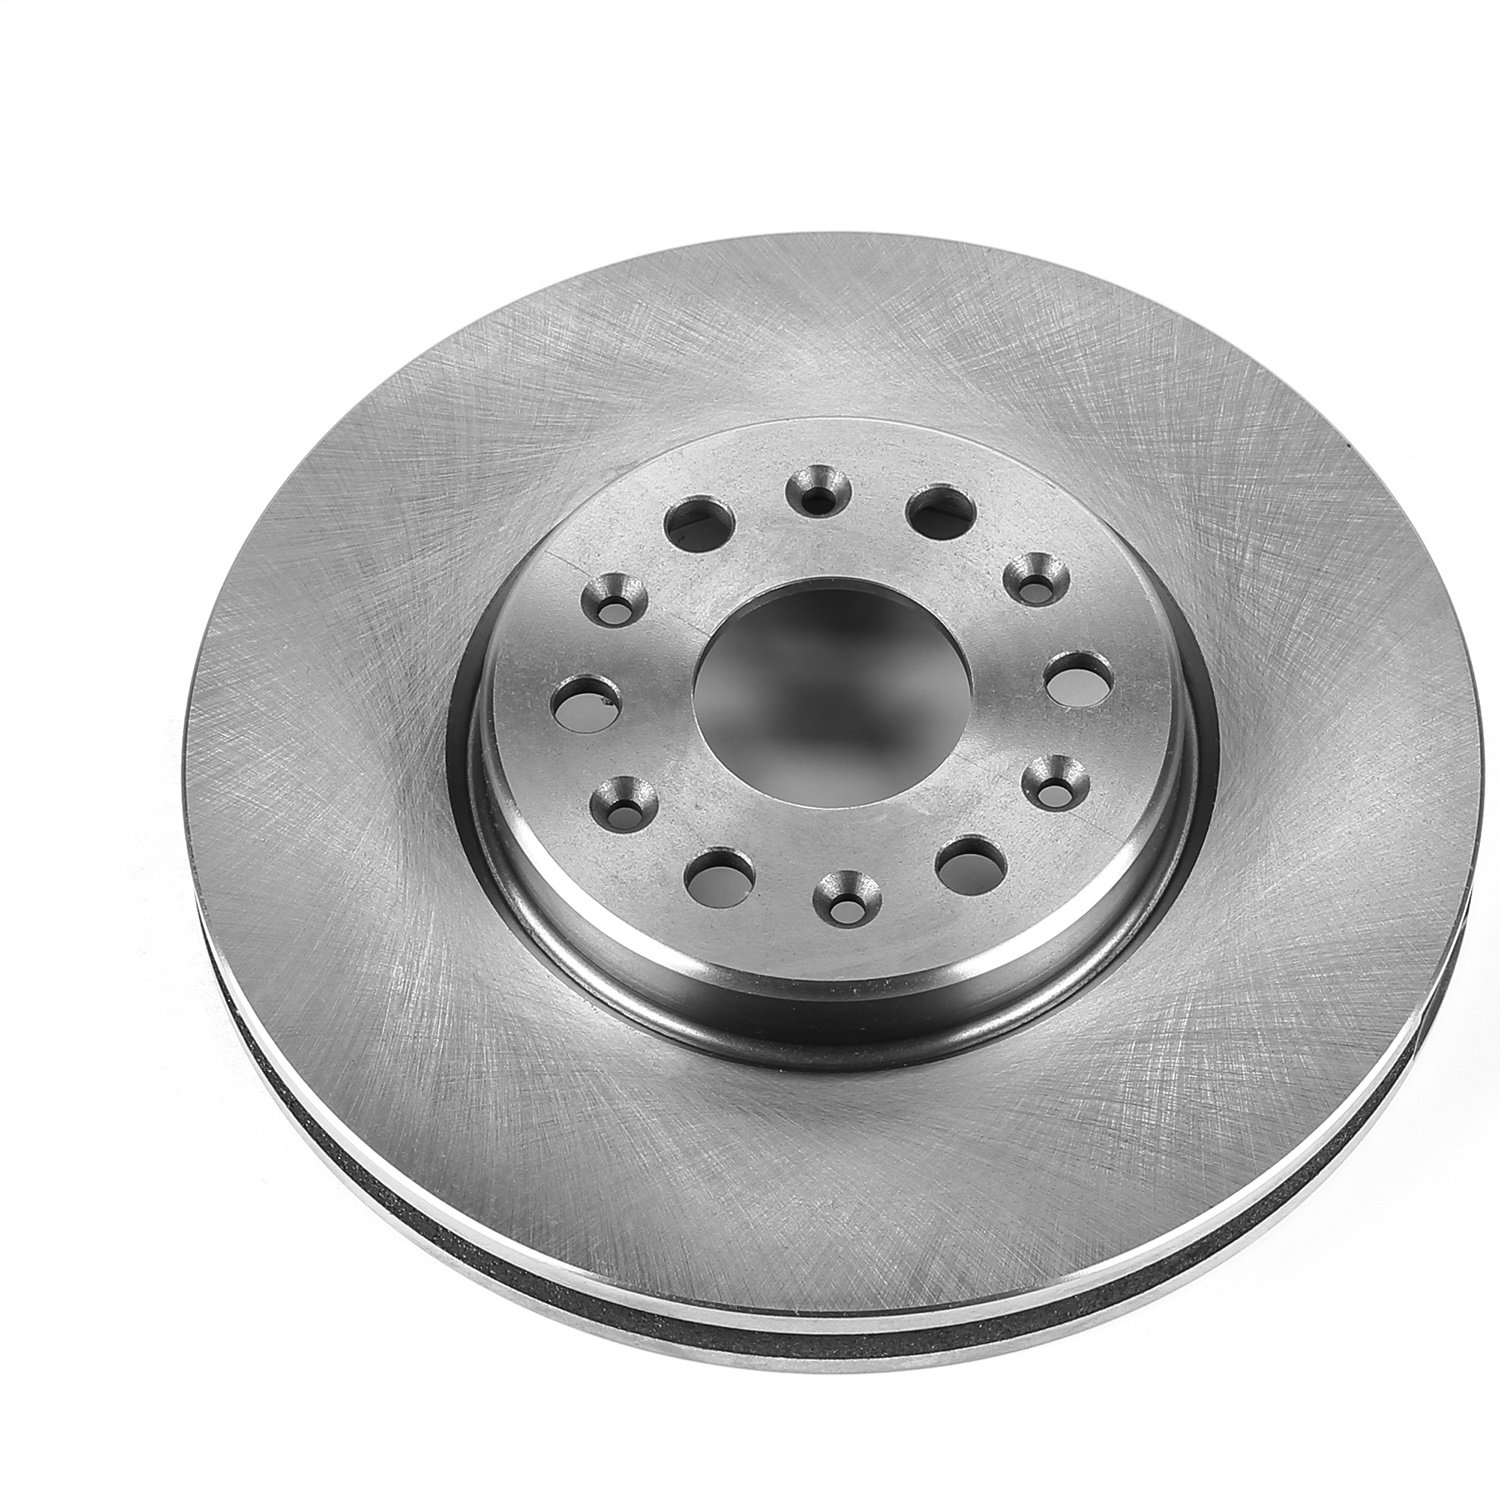 Autospecialty OE Replacement Front Brake Rotor Fits Select Late Model Chevrolet, GMC, Buick Models